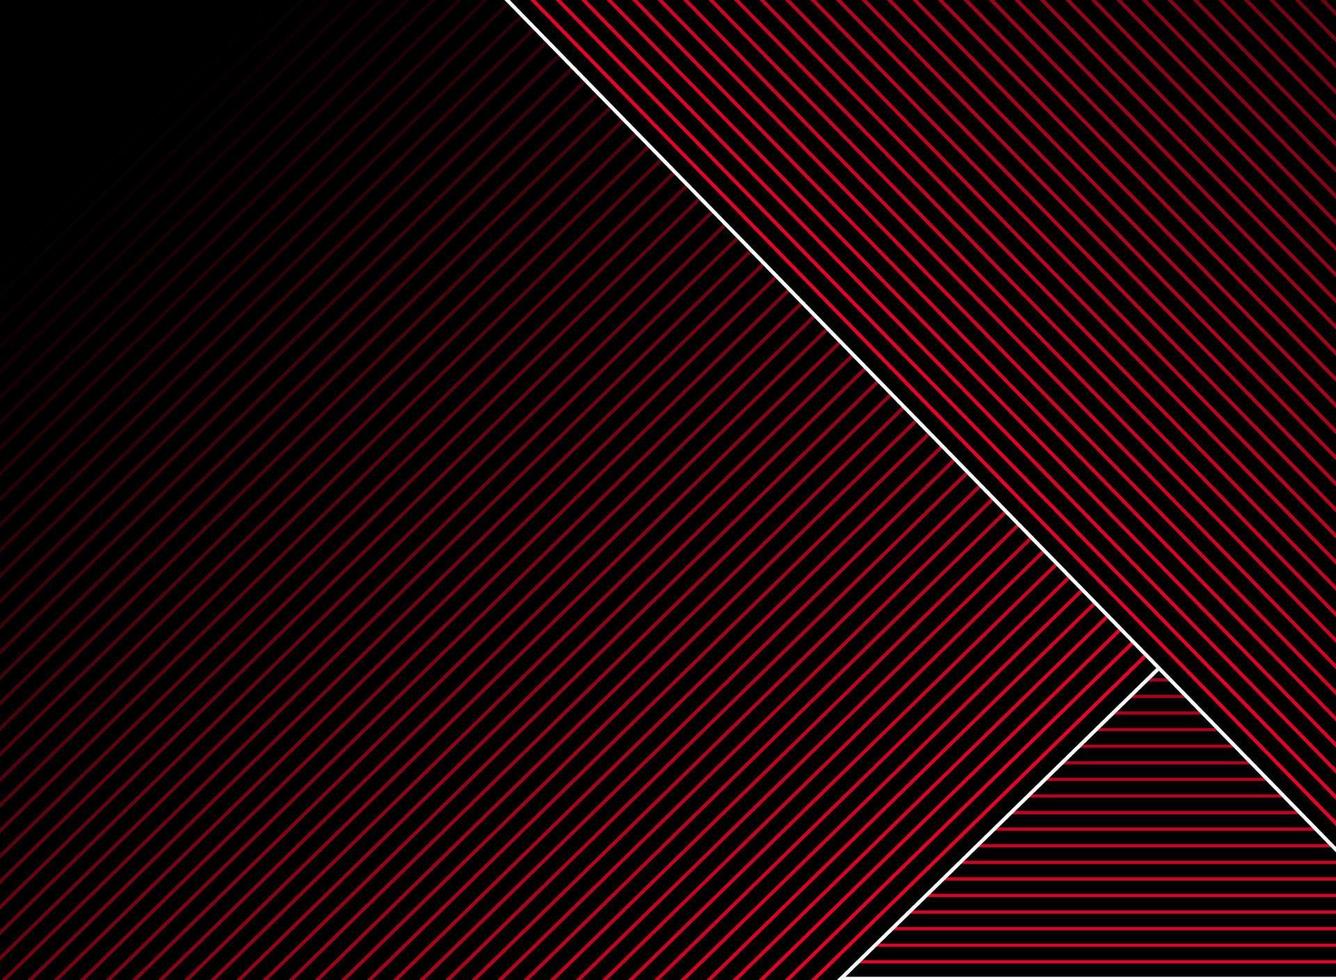 Abstract striped red lines pattern overlay on black background and texture. Geometric creative and Inspiration design. vector